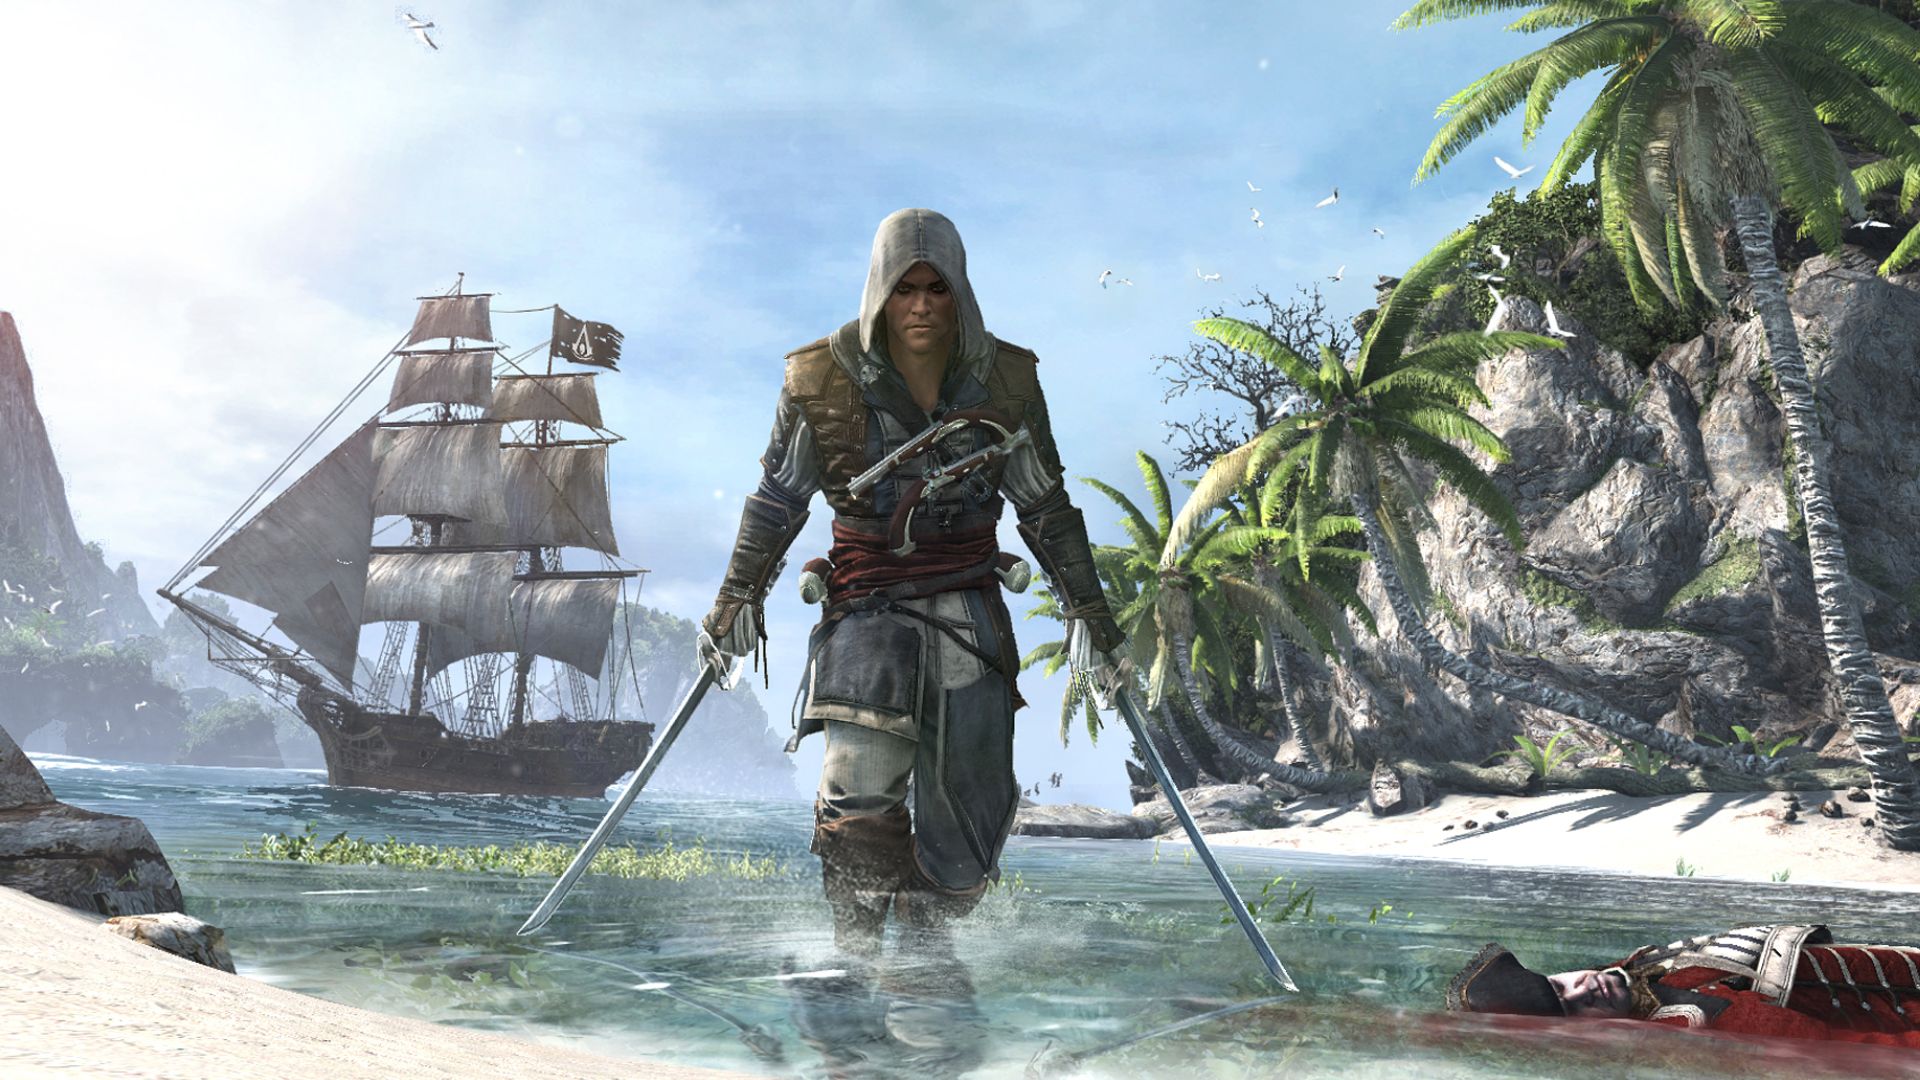 Best history games: Assassin's Creed IV: Black Flag. Image shows an assassin on a tropical beach with a ship in the background.